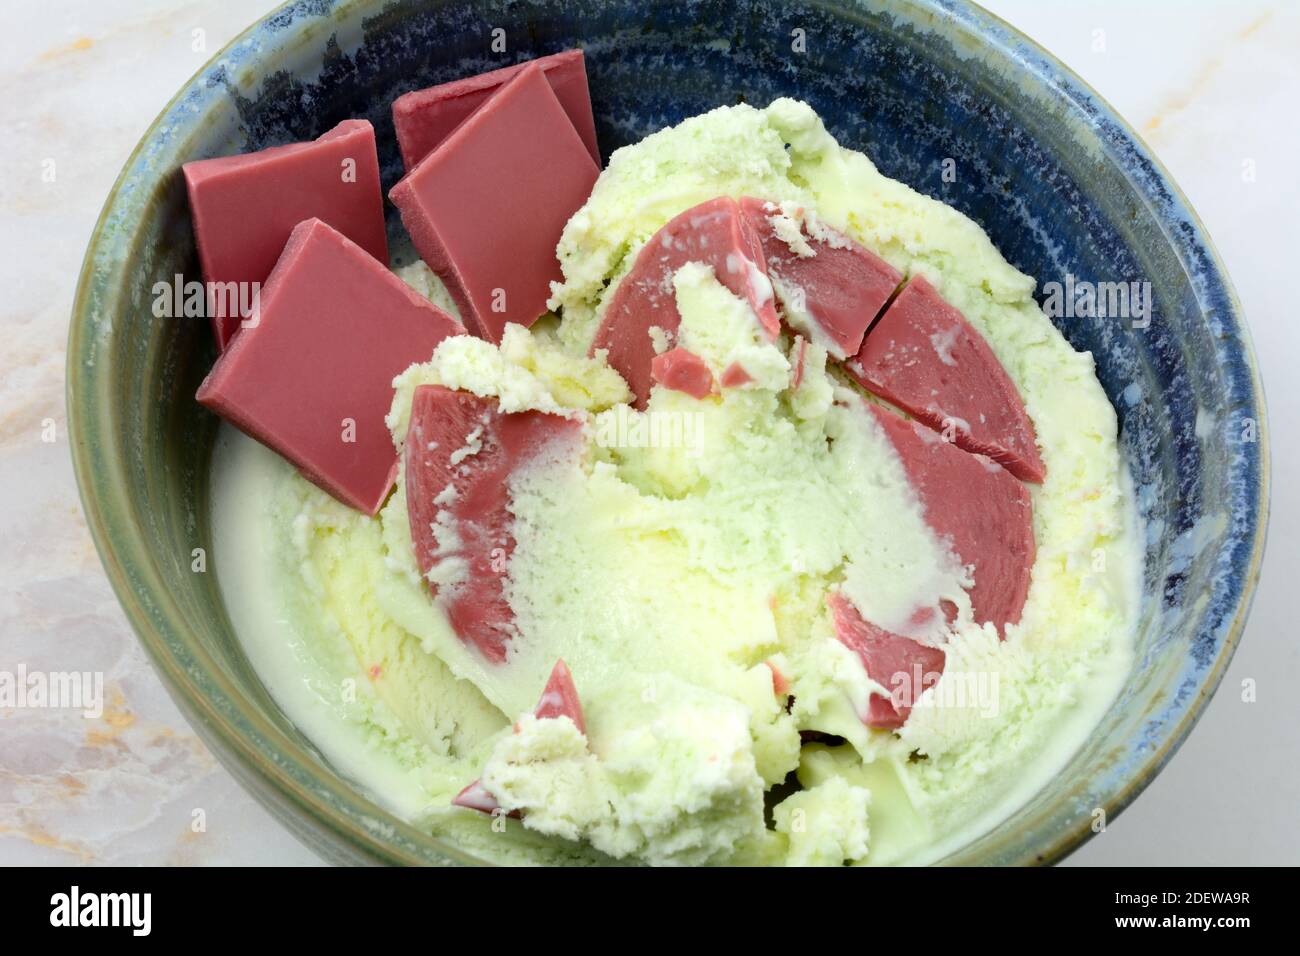 Layered pistachio sweet cream and ruby chocolate ice cream with ruby chocolate candy pieces on side in ceramic bowl on table Stock Photo